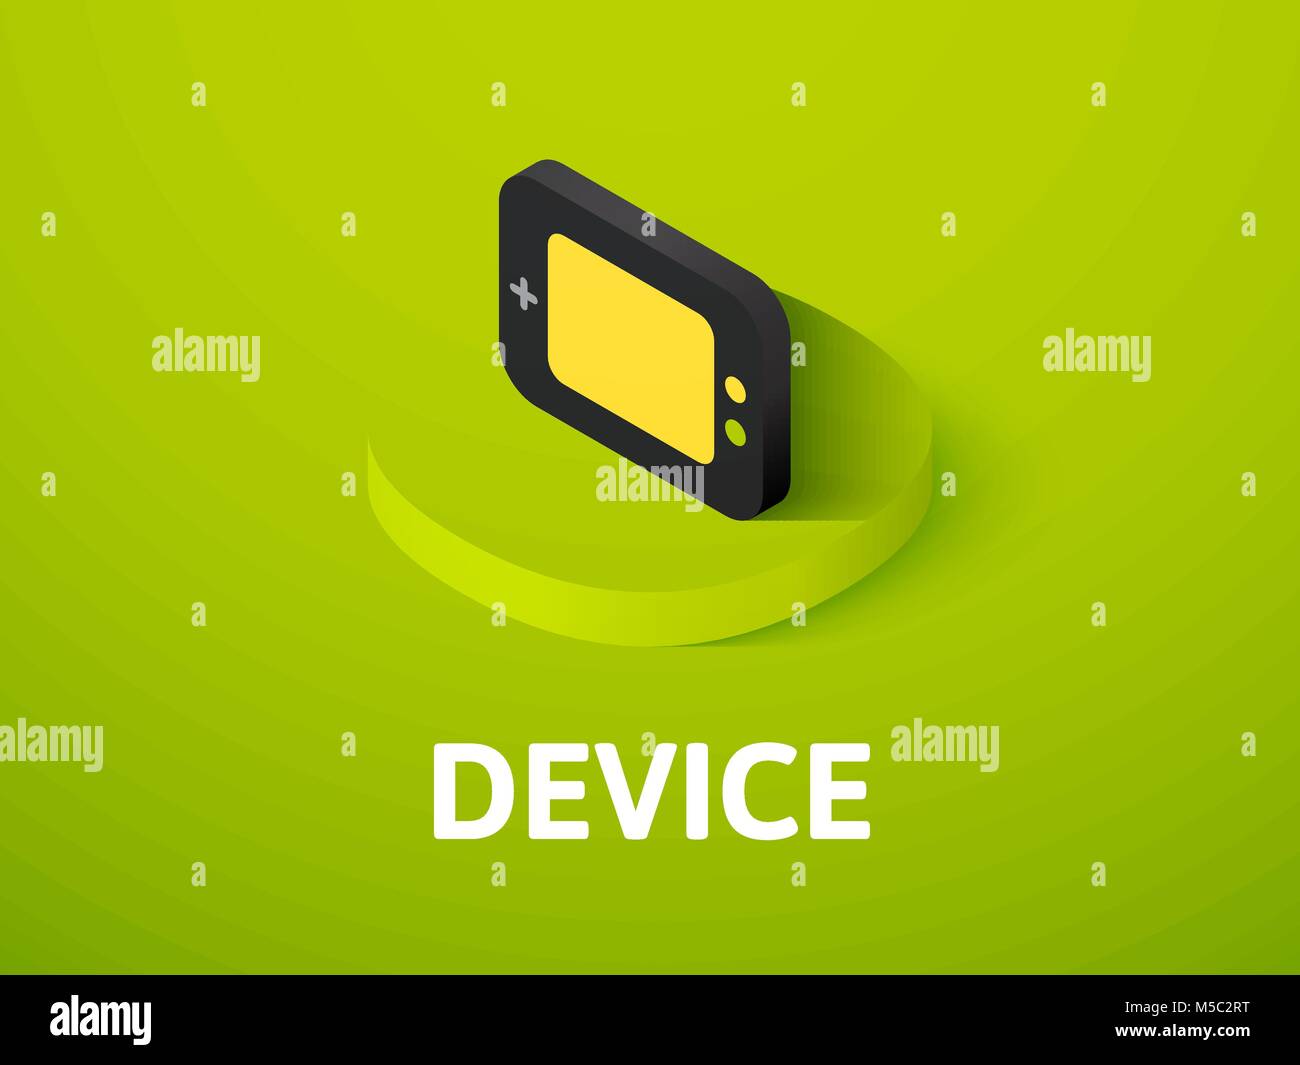 Device isometric icon, isolated on color background Stock Vector